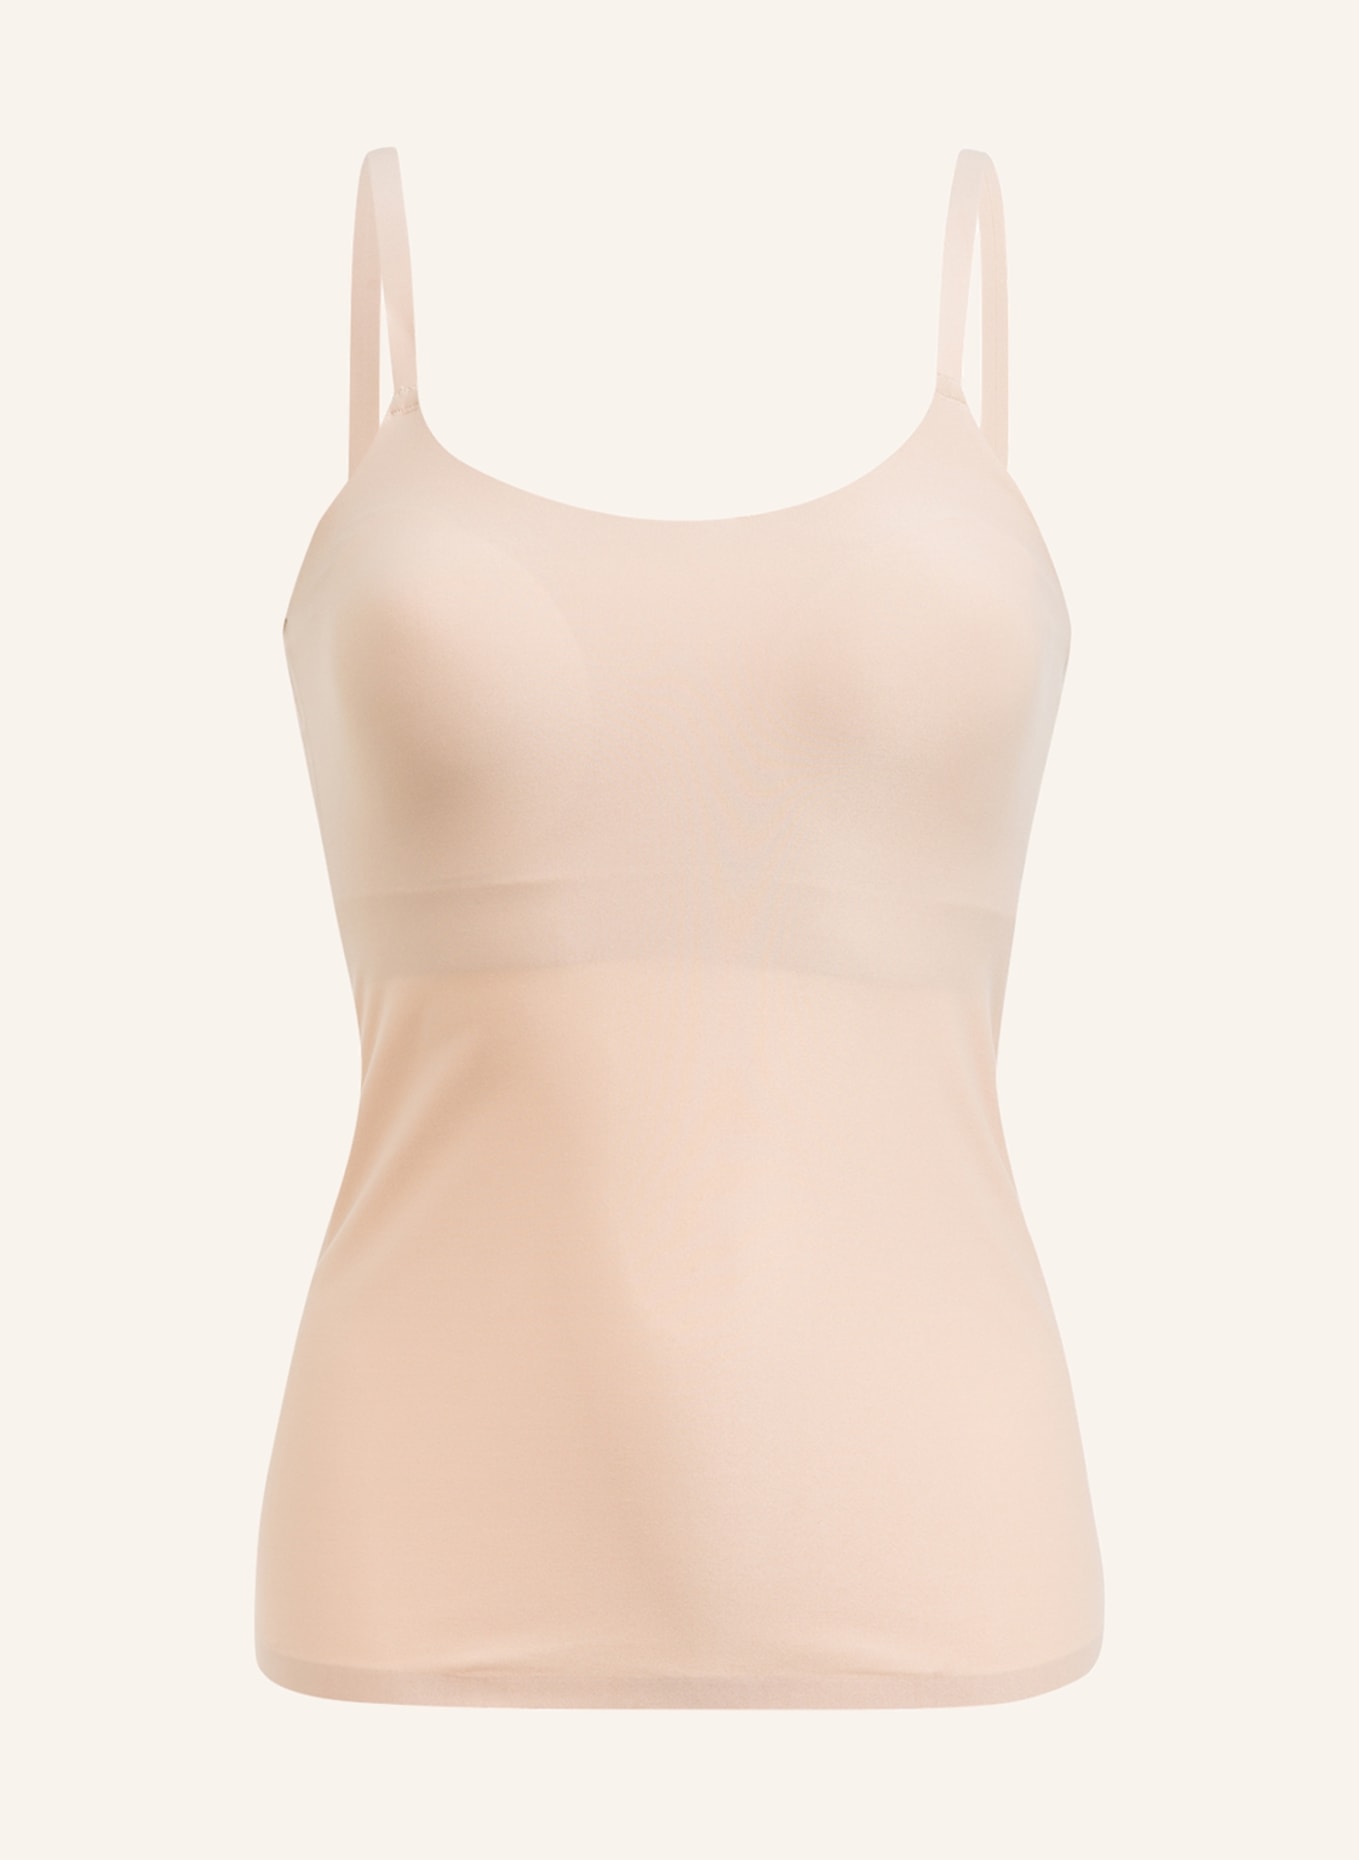 CHANTELLE Top SOFTSTRETCH mit Soft-Cups, Farbe: NUDE (Bild 1)